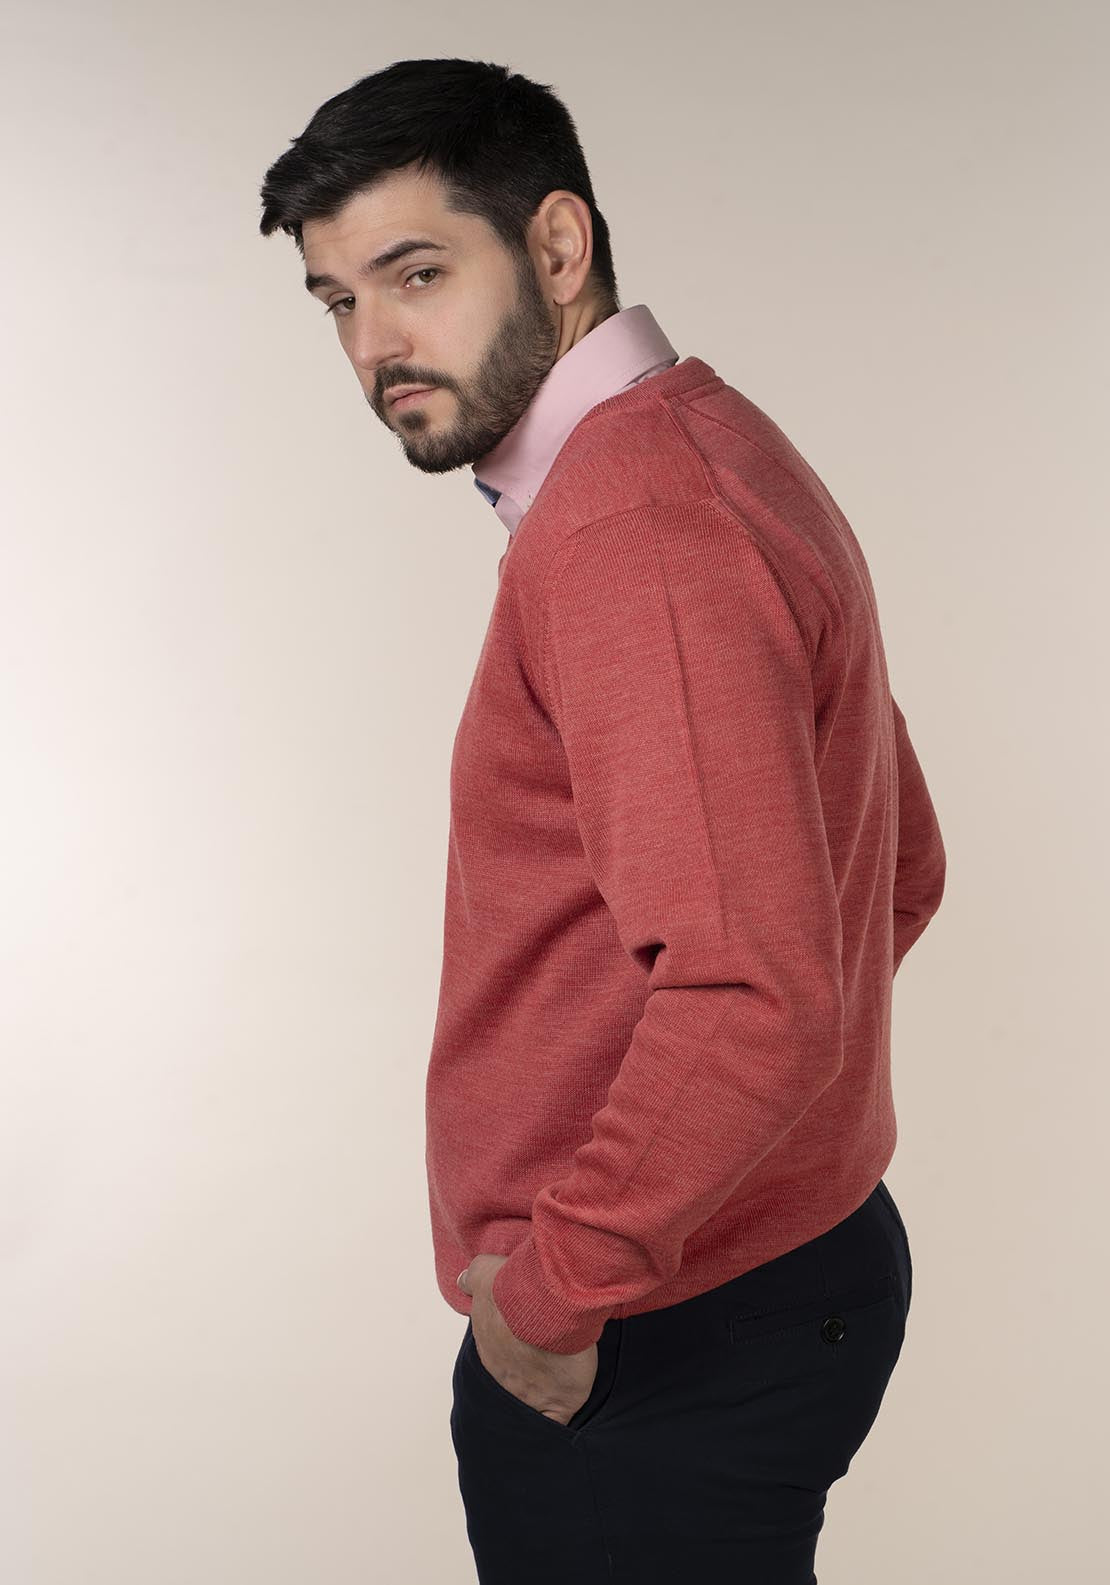 Yeats Mens 100% Cotton V-Neck Jumper 3 Shaws Department Stores